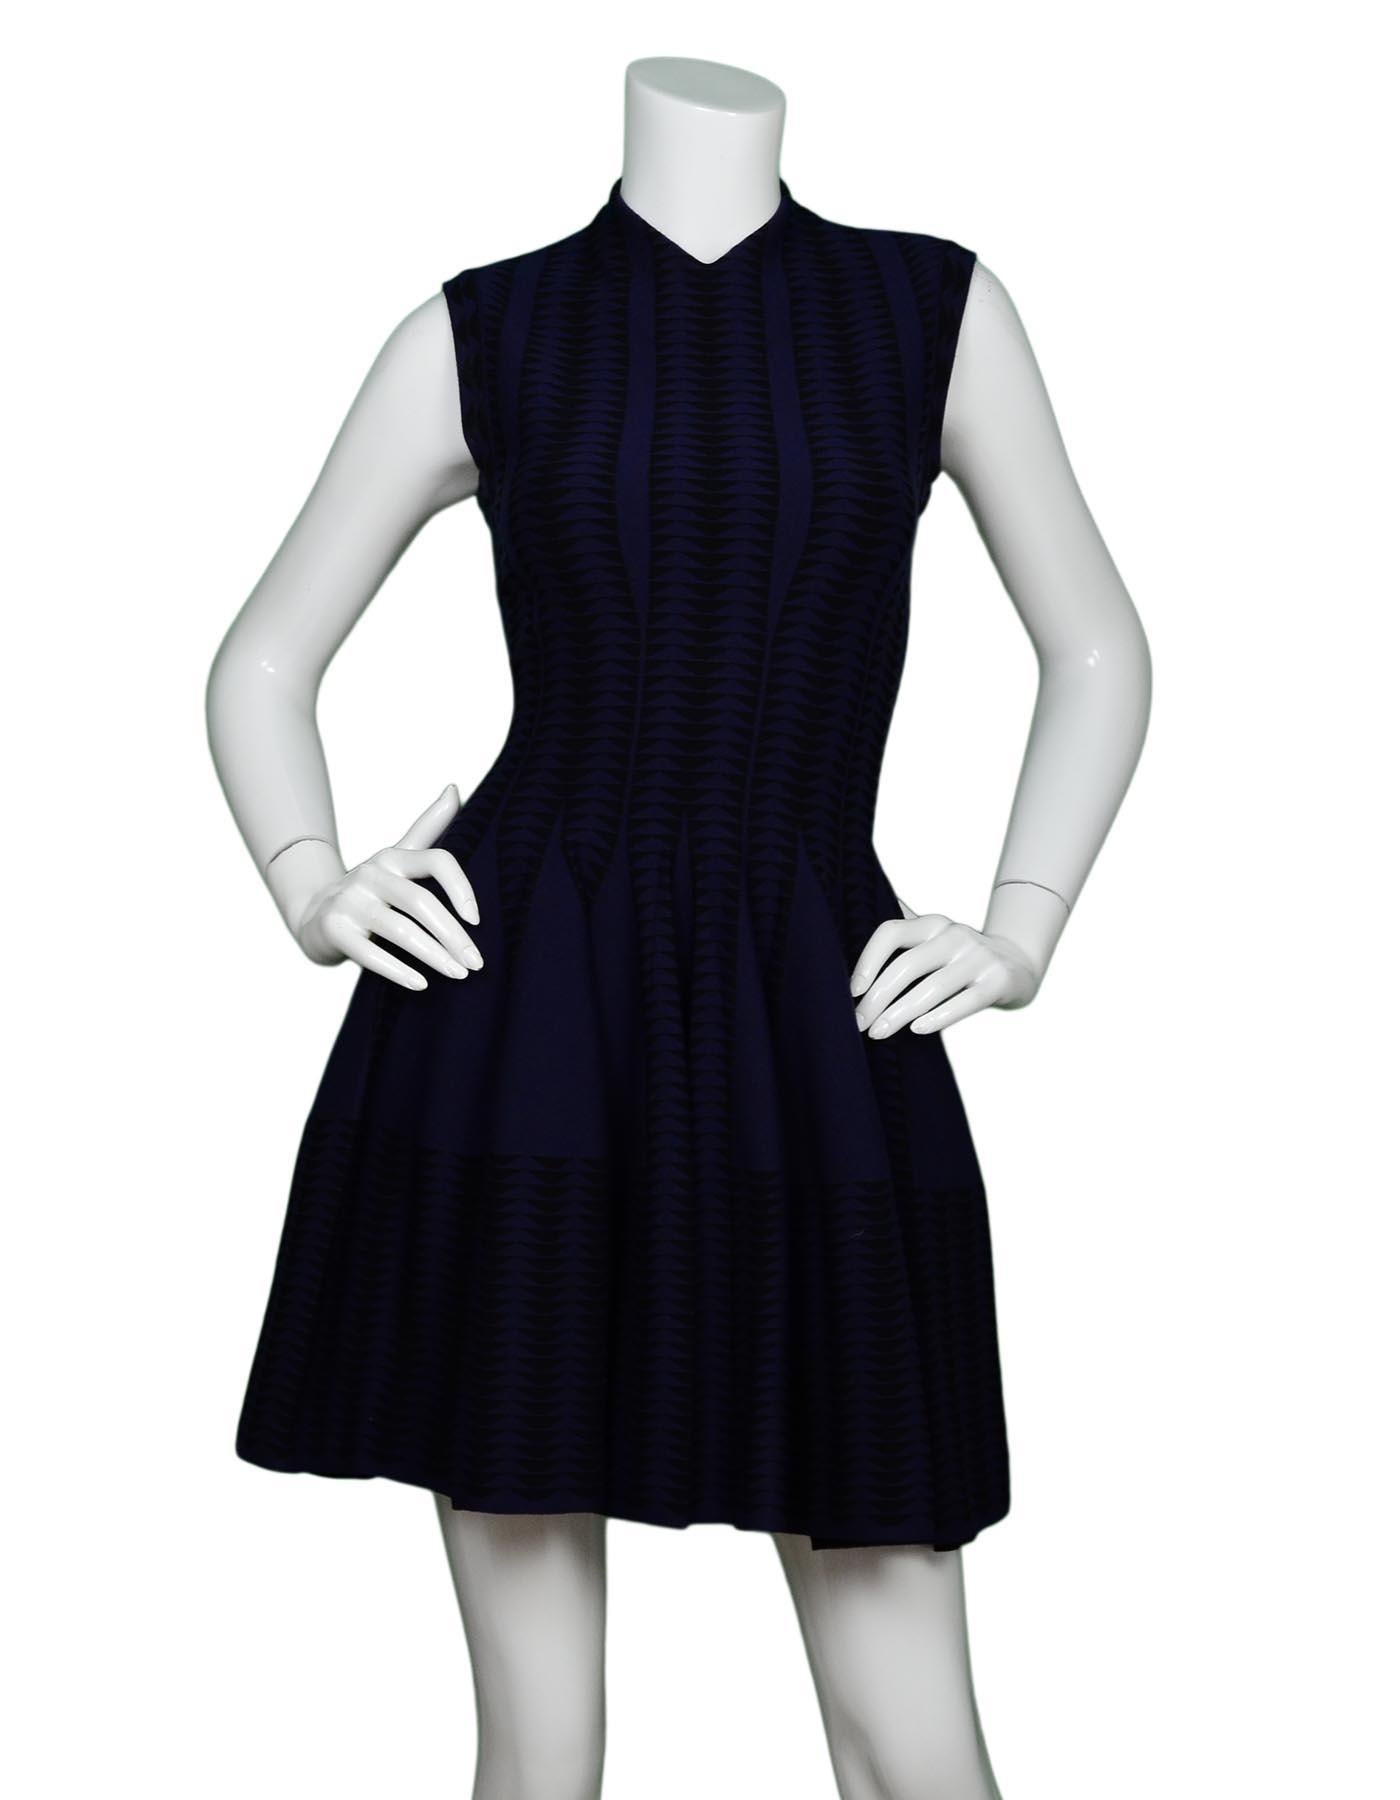 Alaia Navy/Black V-Neck Fit & Flare Cap Sleeve Dress Sz 38

Made In: Italy
Color: Navy/black
Materials: 42% wool, 36% viscose, 12% polyester, 8% nylon, 2% elastane 
Opening/Closure: Hidden back zipper
Overall Condition: Excellent pre-owned condition